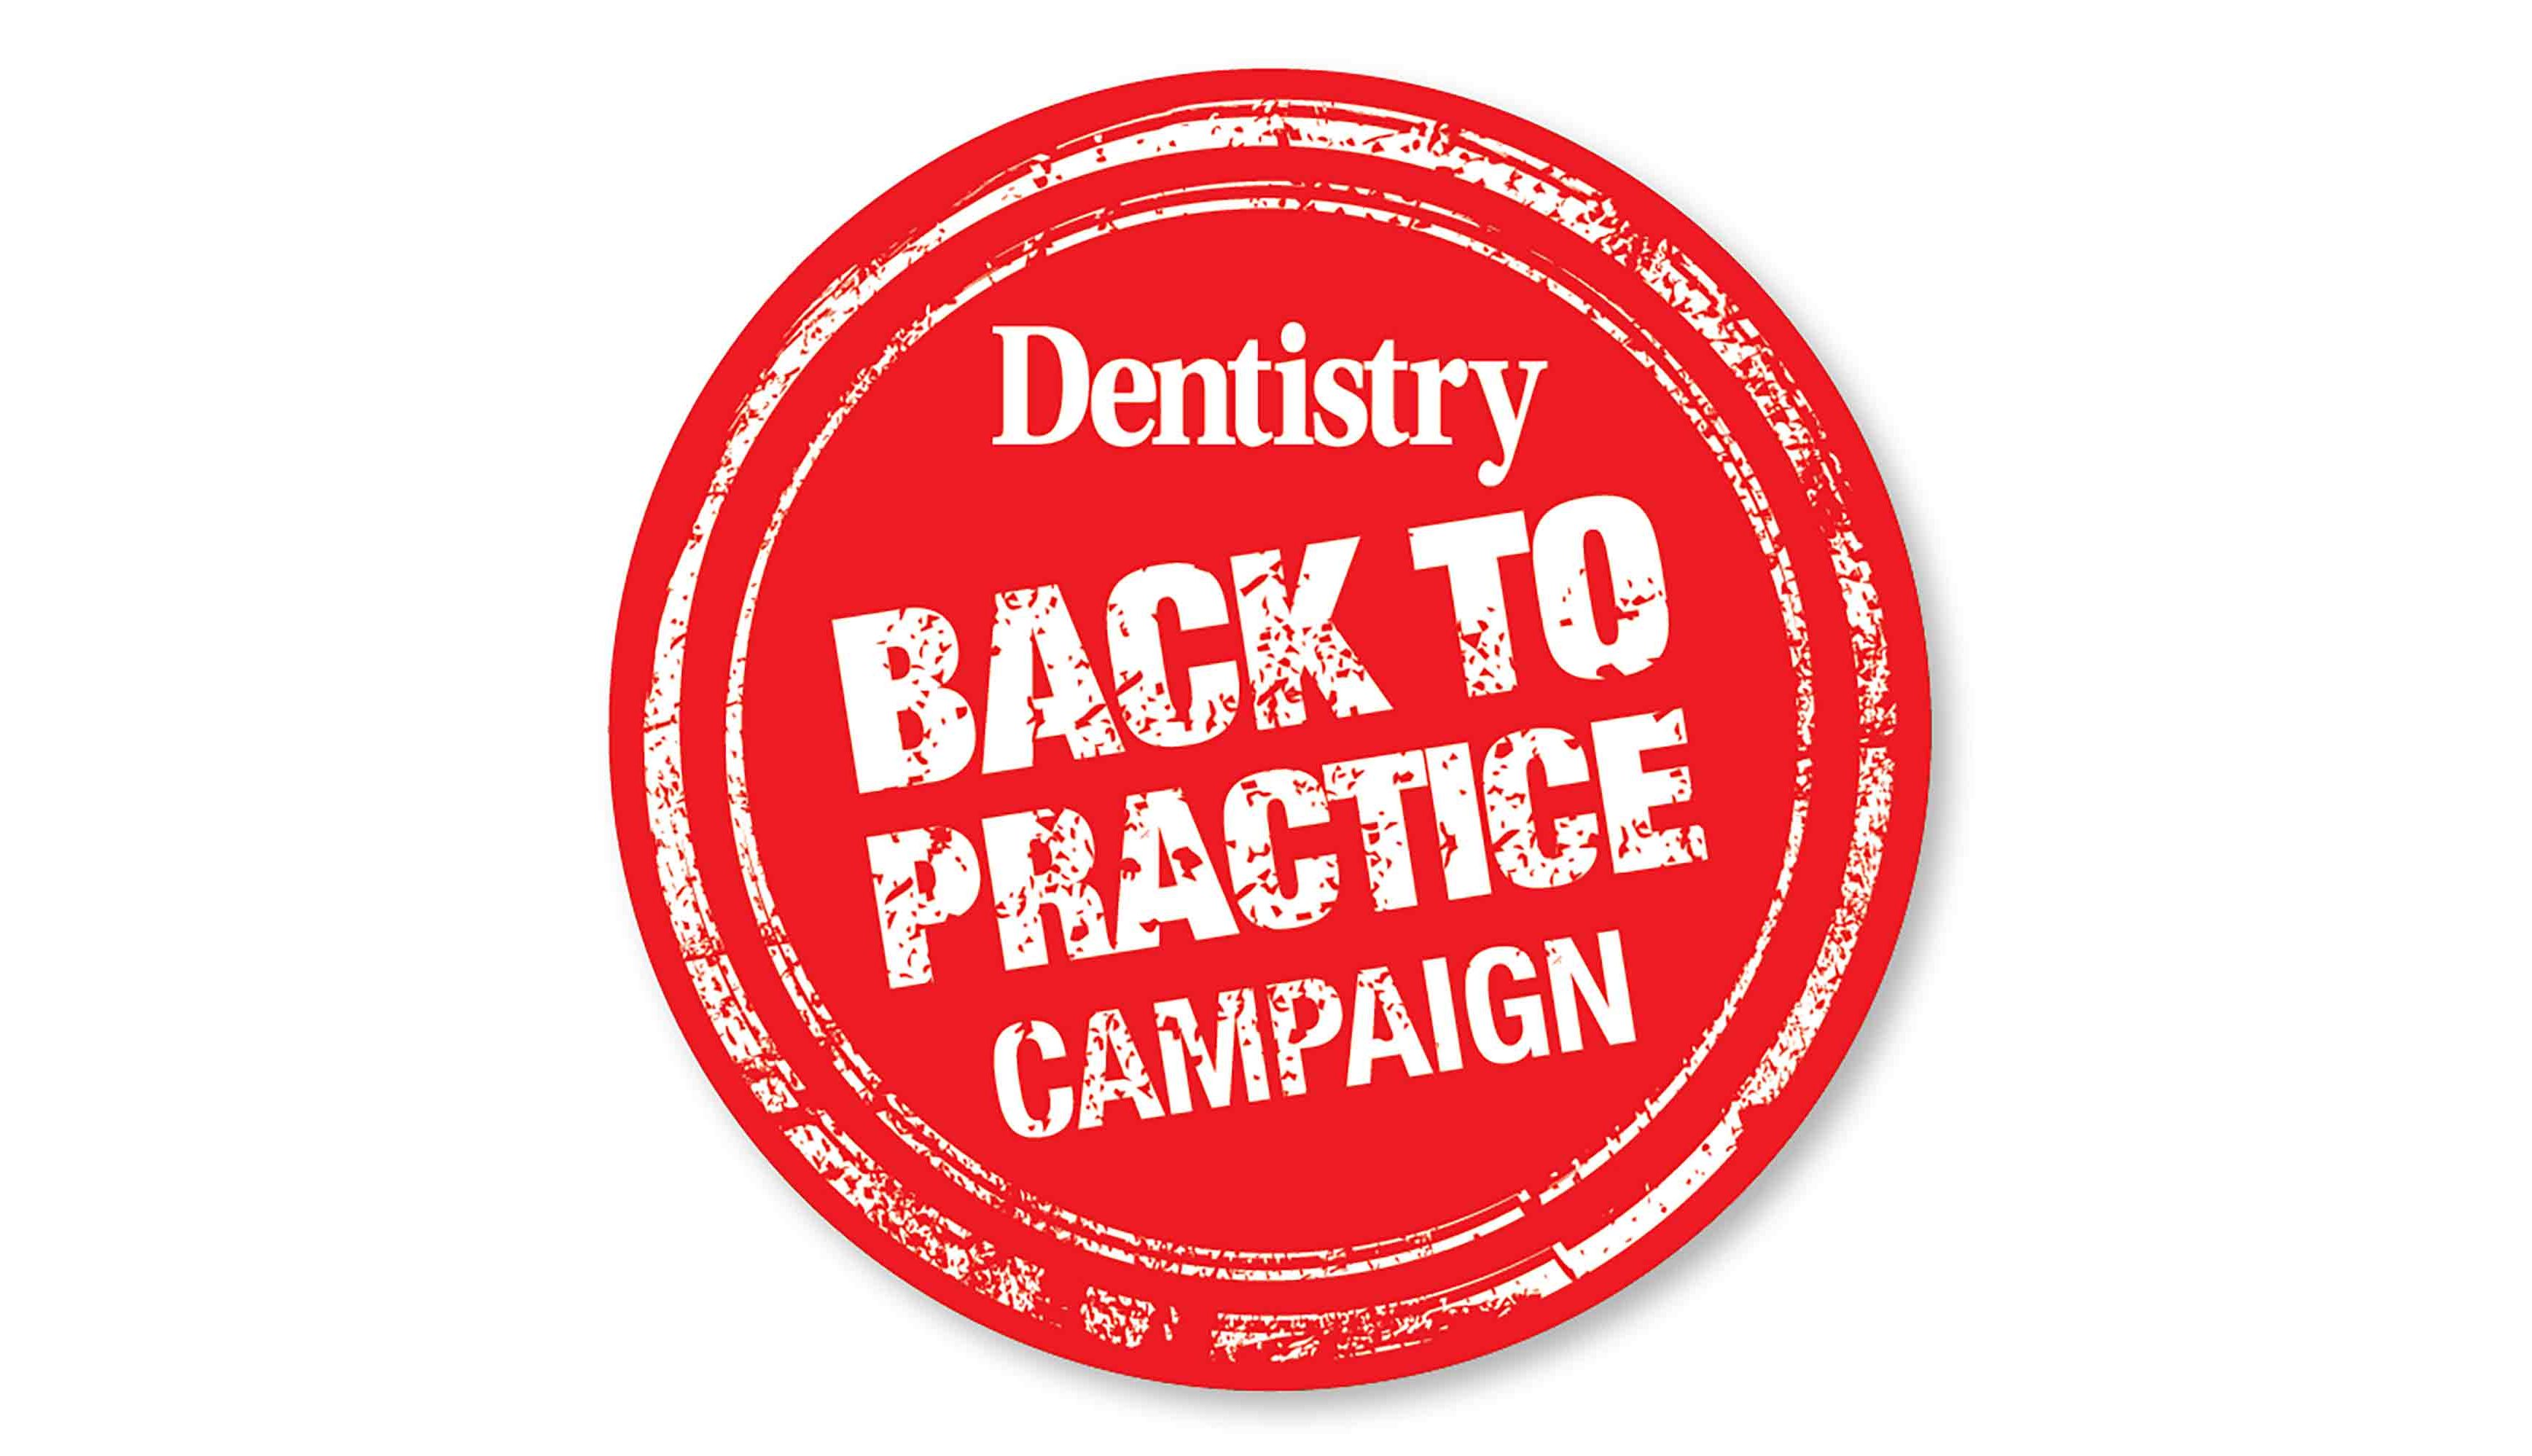 Dentistry has launched a 'Back to Practice' campaign to get behind the drive for the profession to get back to work